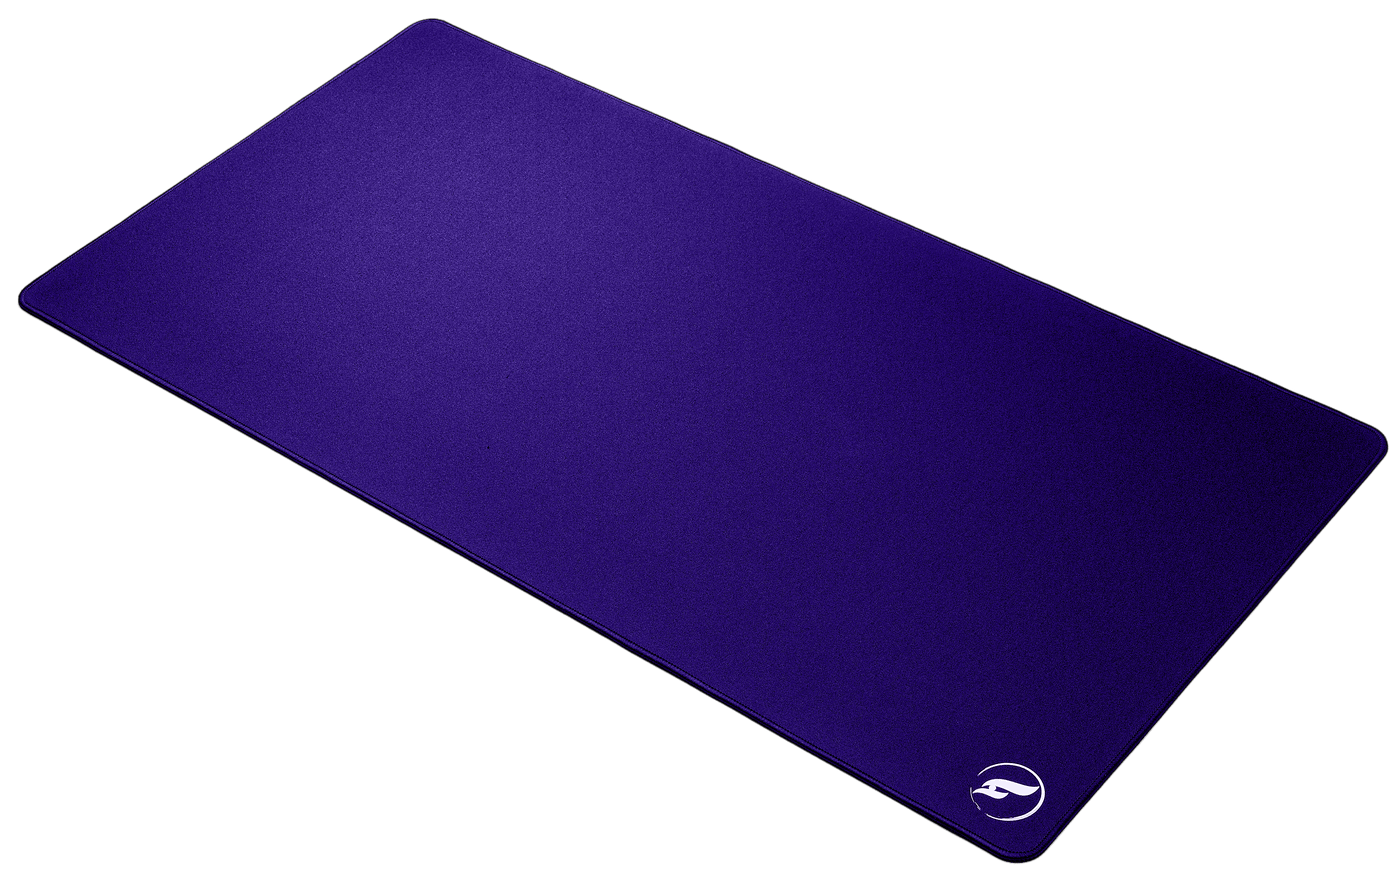 Infinity 2XL purple hybrid gaming mouse pad Odin Gaming